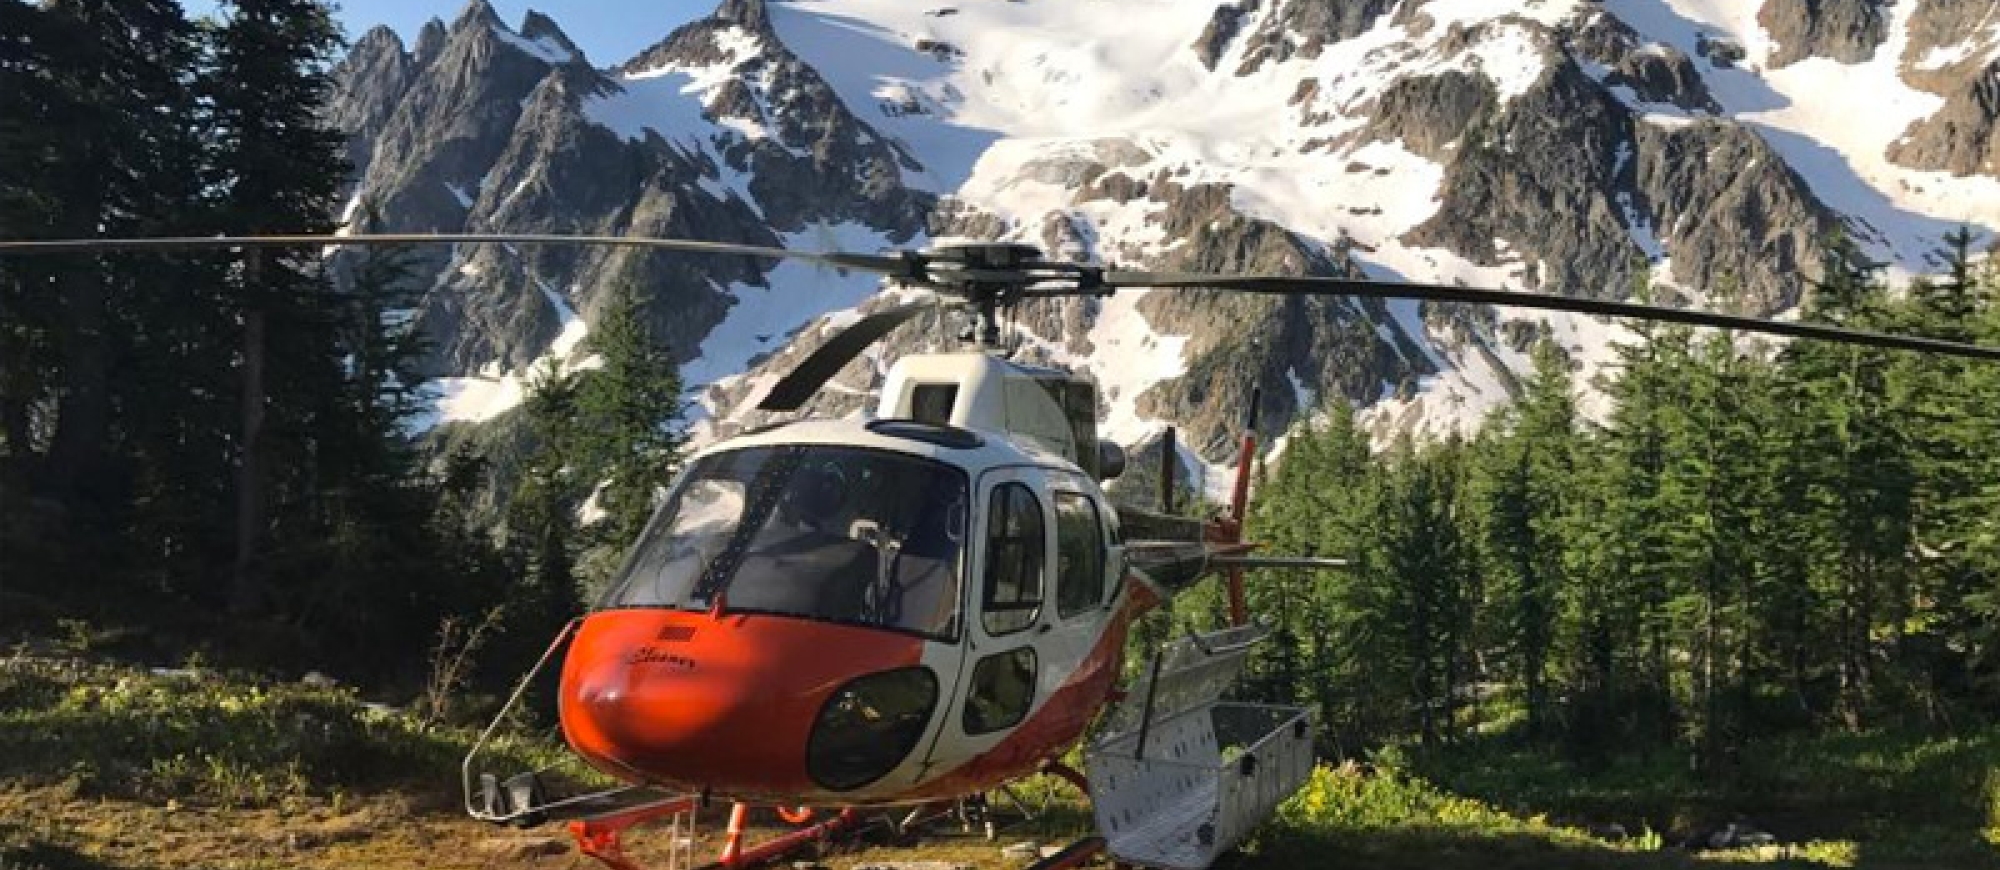 Kootenay Valley Helicopters Ltd